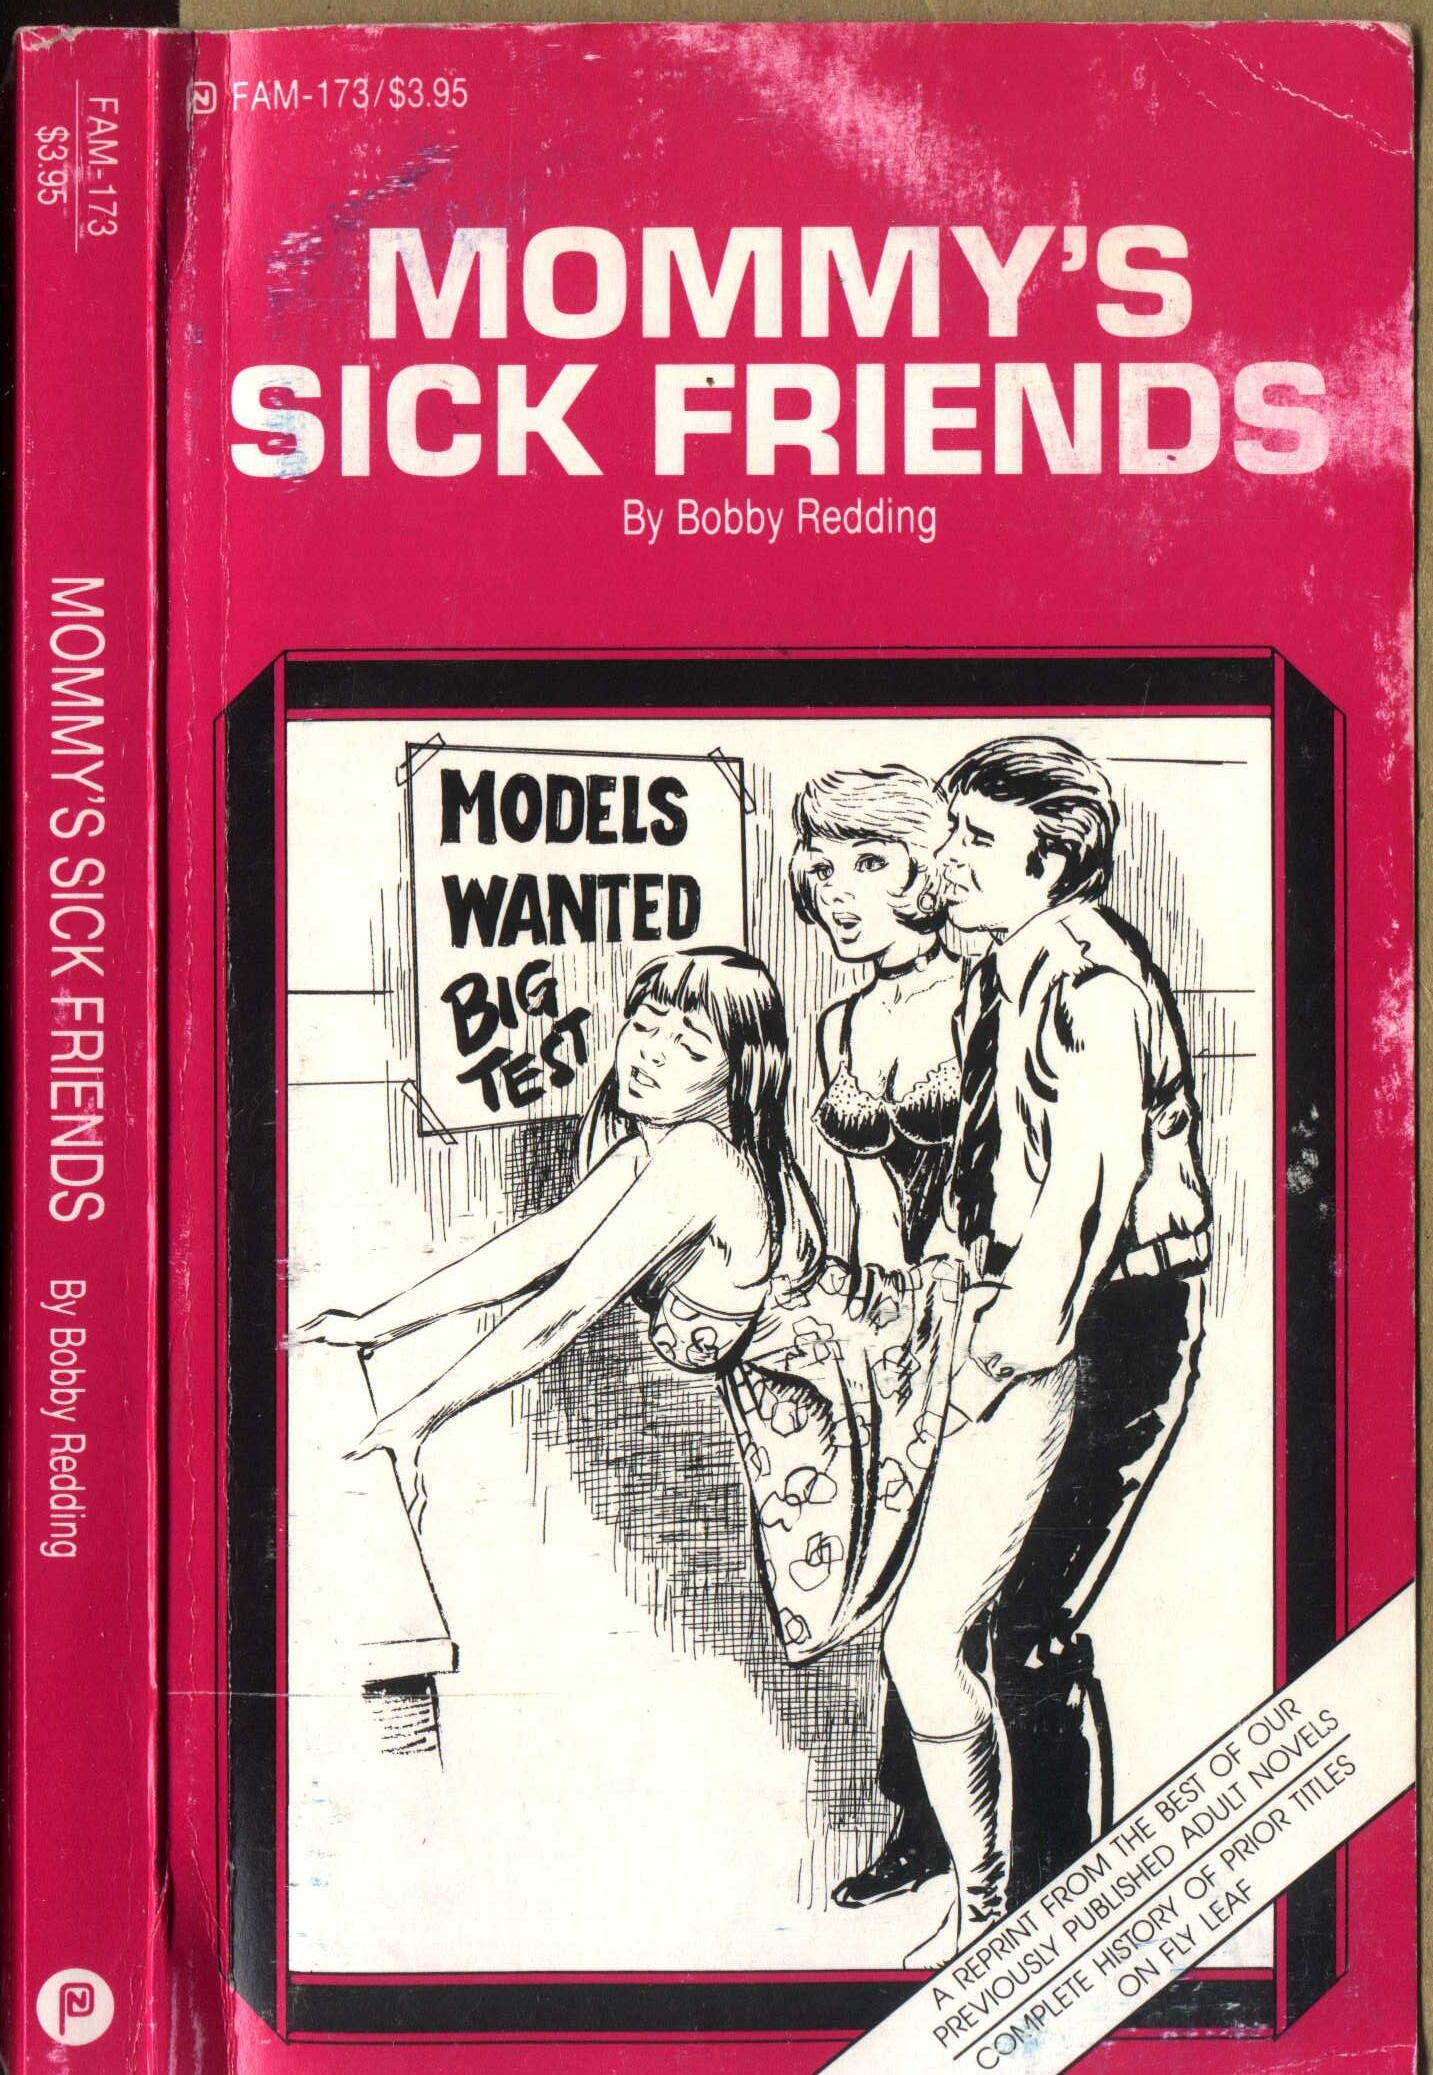 Mommy_s sick friends